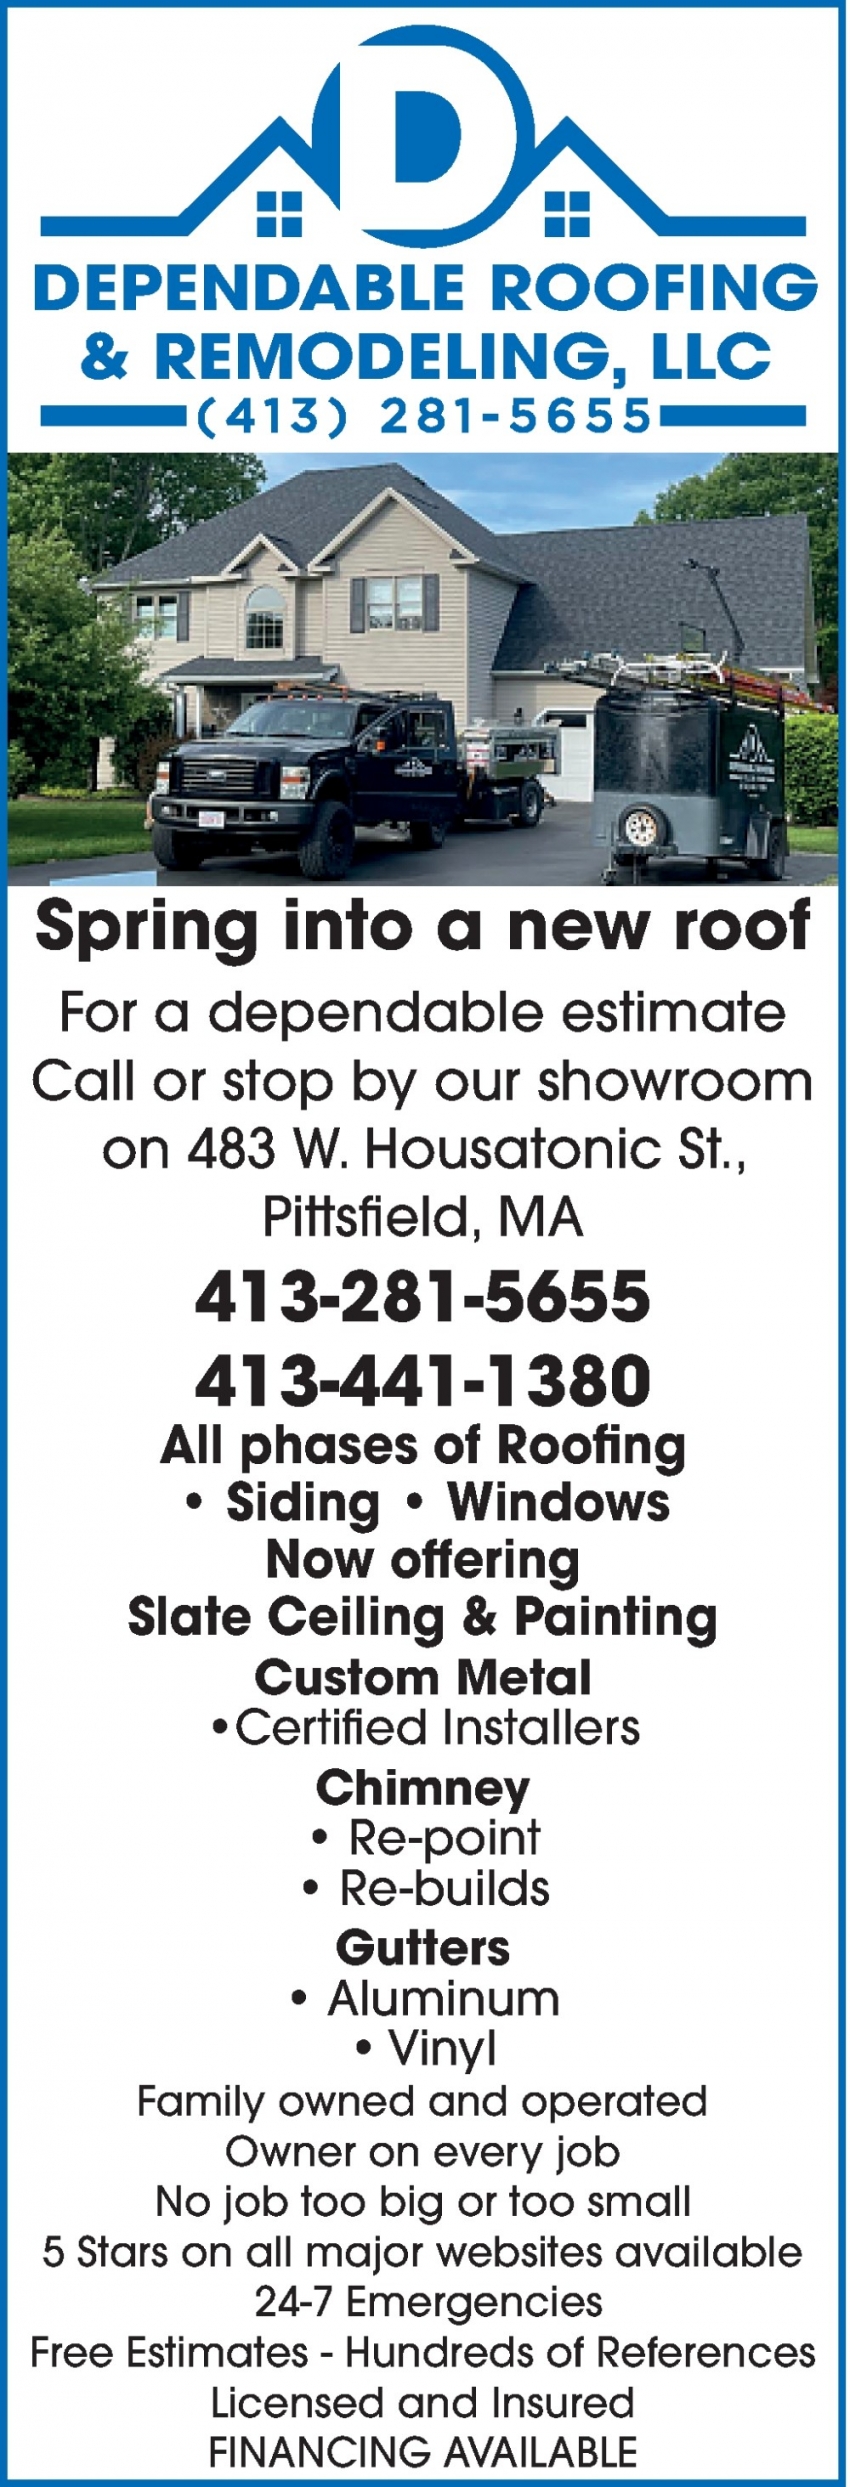 Spring Into a New Roof